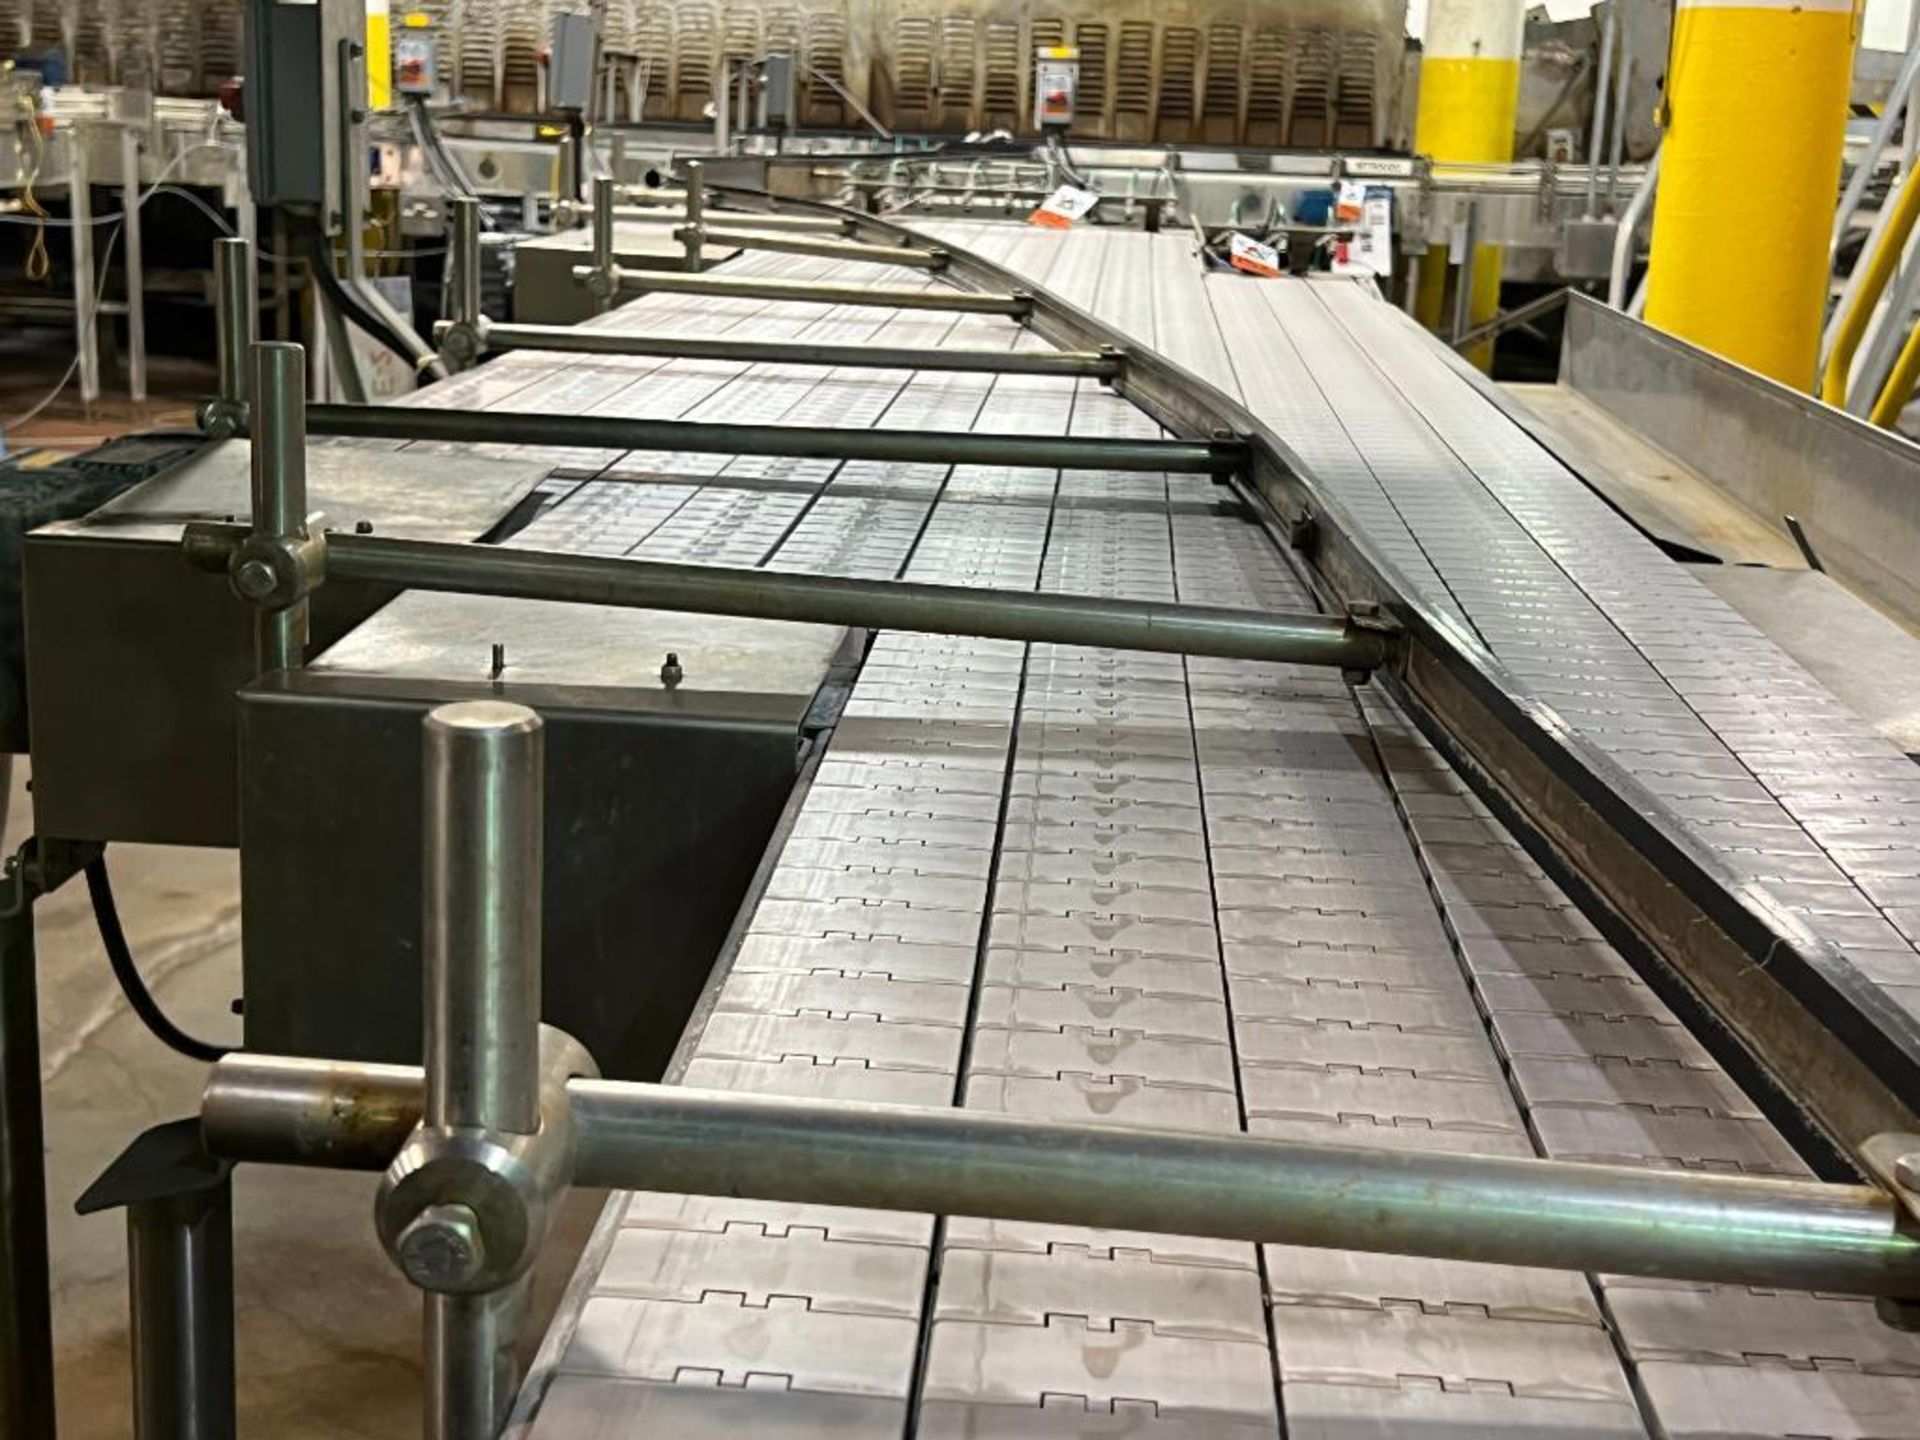 stainless steel step-belt can conveyor - Image 25 of 25